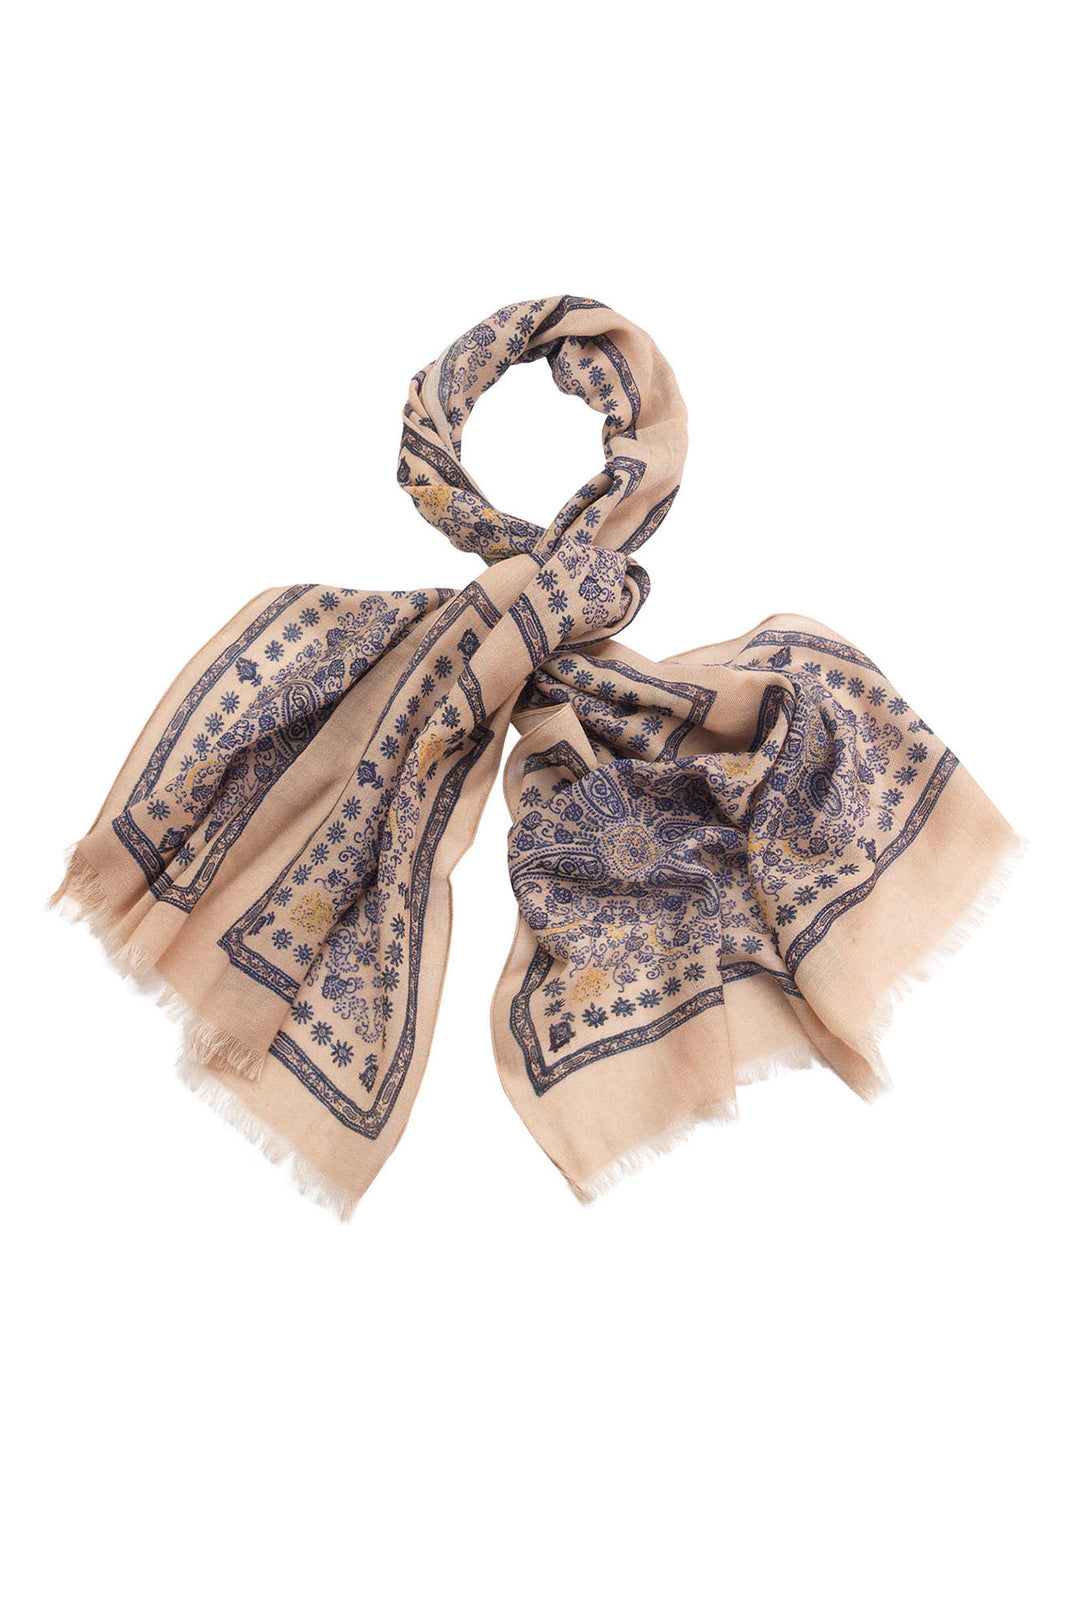 wool winter large ladies scarf with mehndi blue print on a light brown background by One Hundred Stars